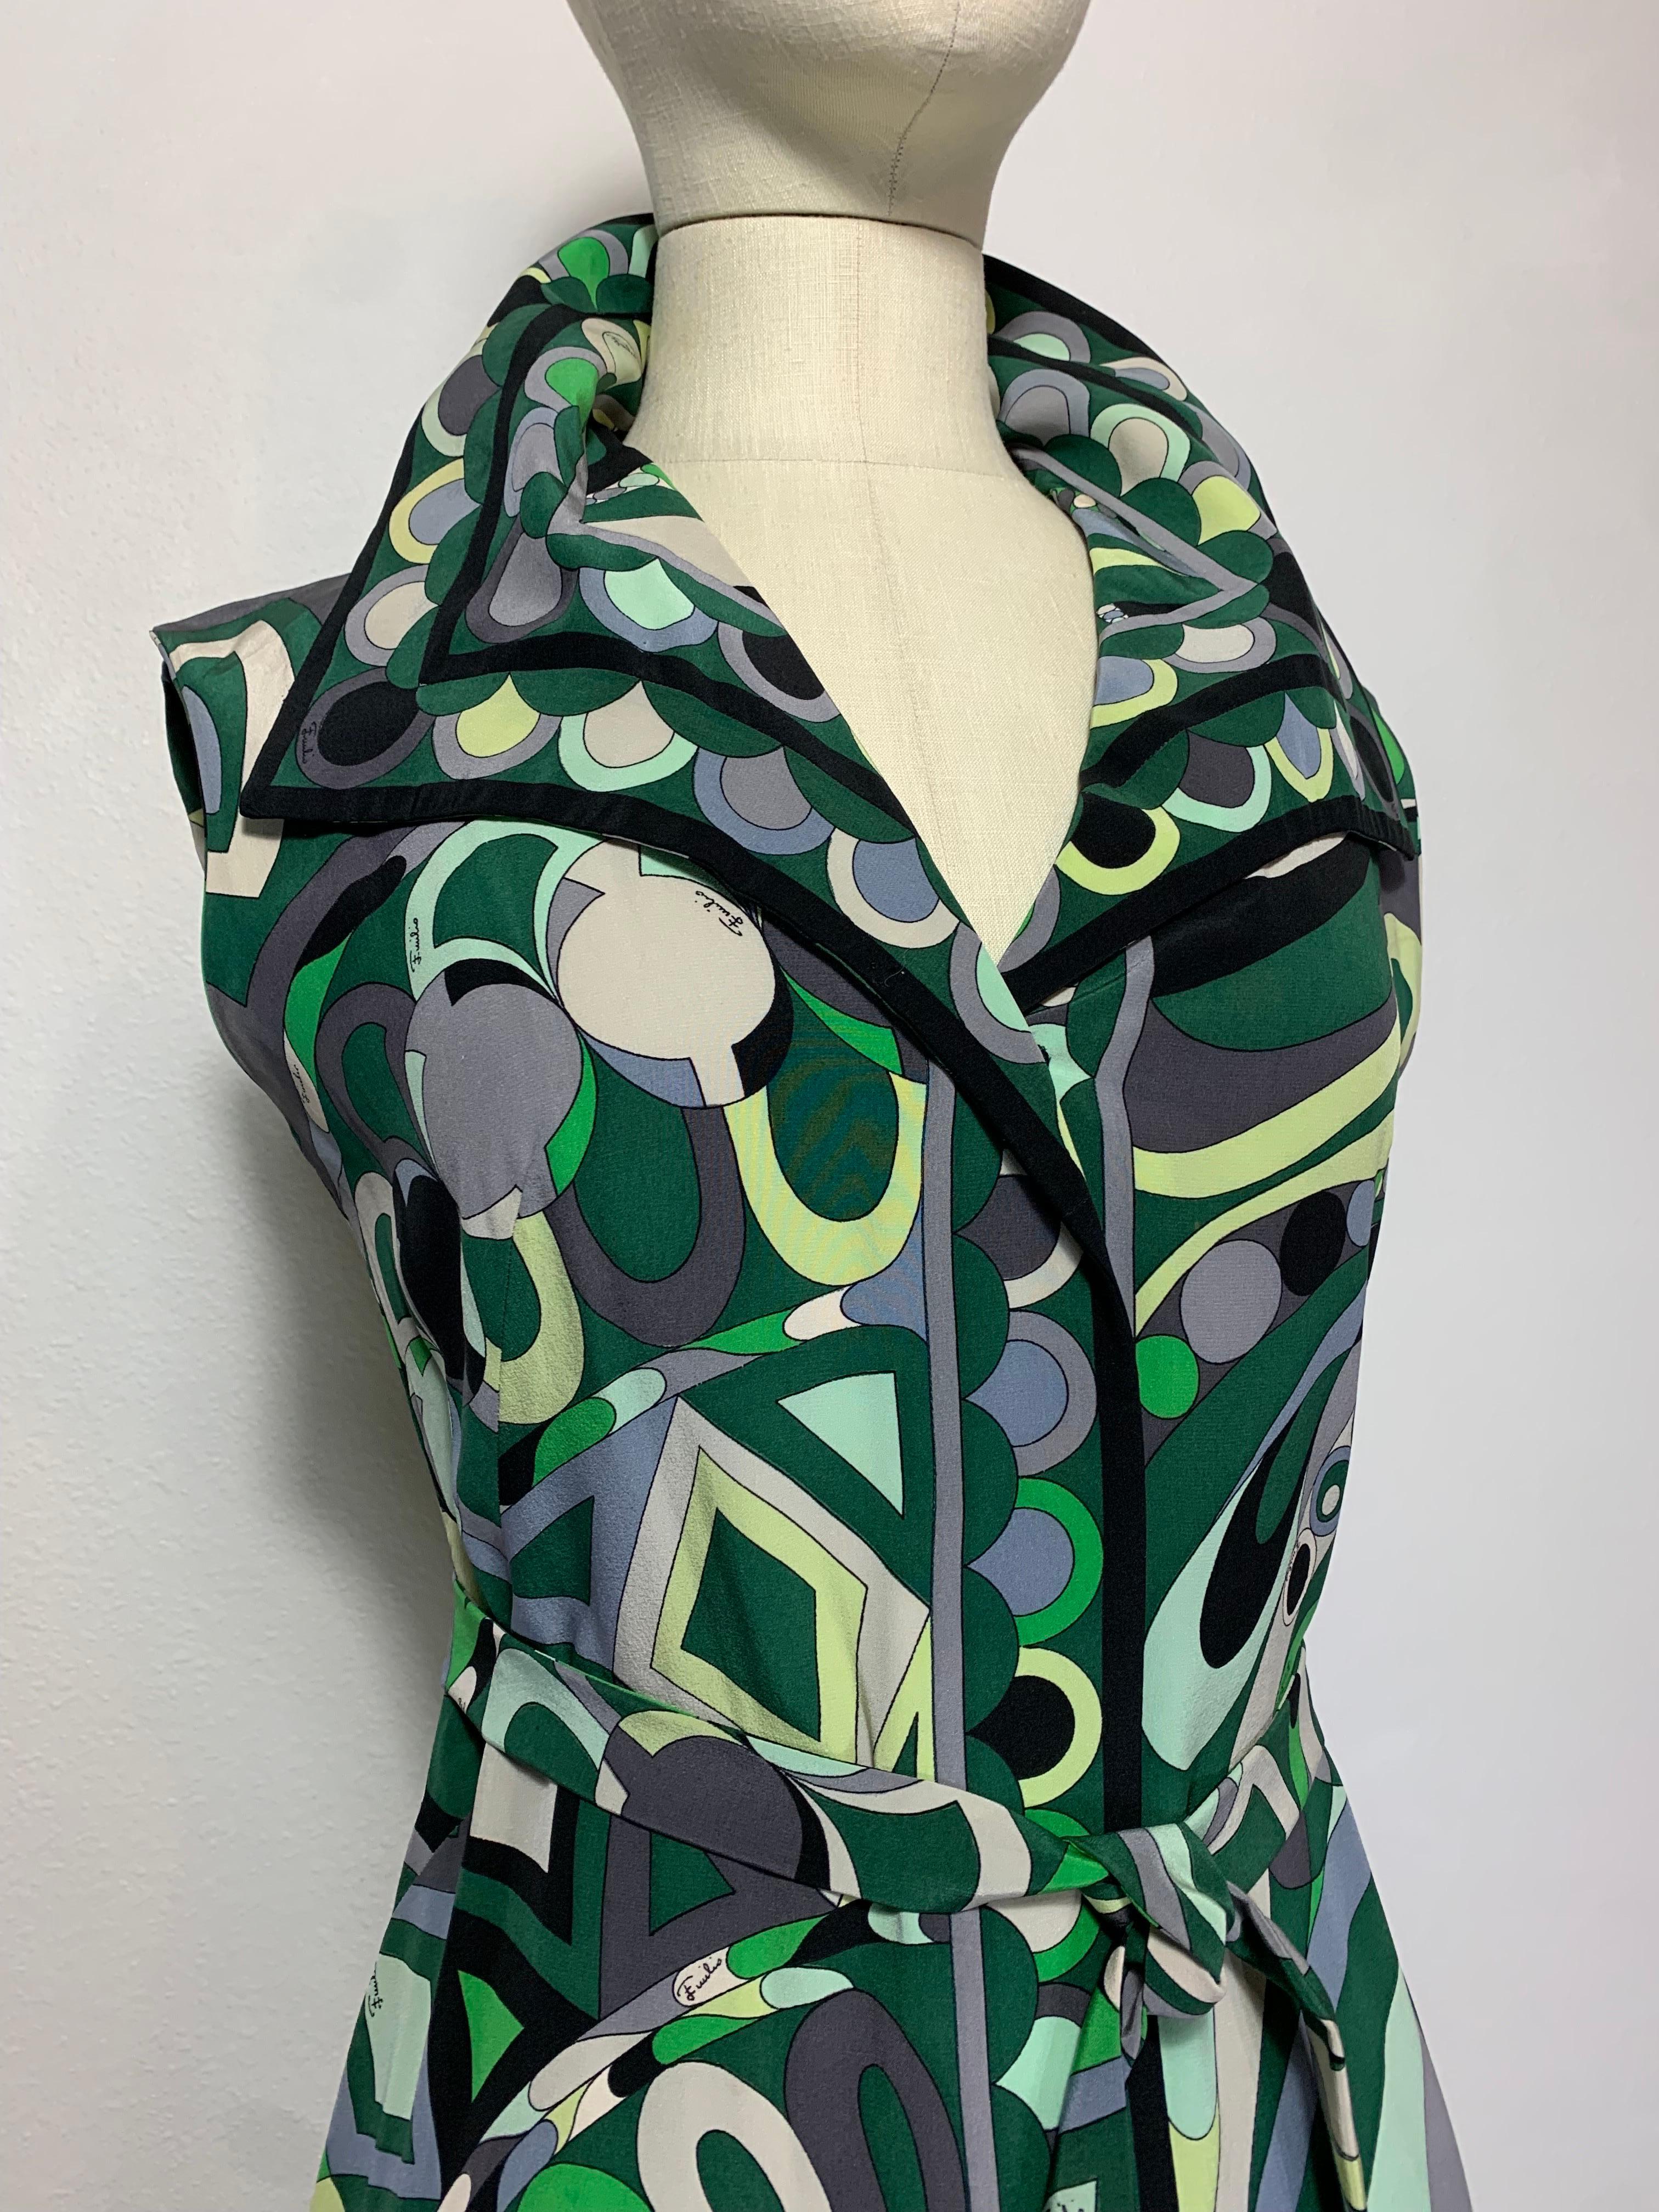 1960s Emilio Pucci Mod Print Silk Day Dress in Greens Black & Gray w Wide Collar In Excellent Condition For Sale In Gresham, OR